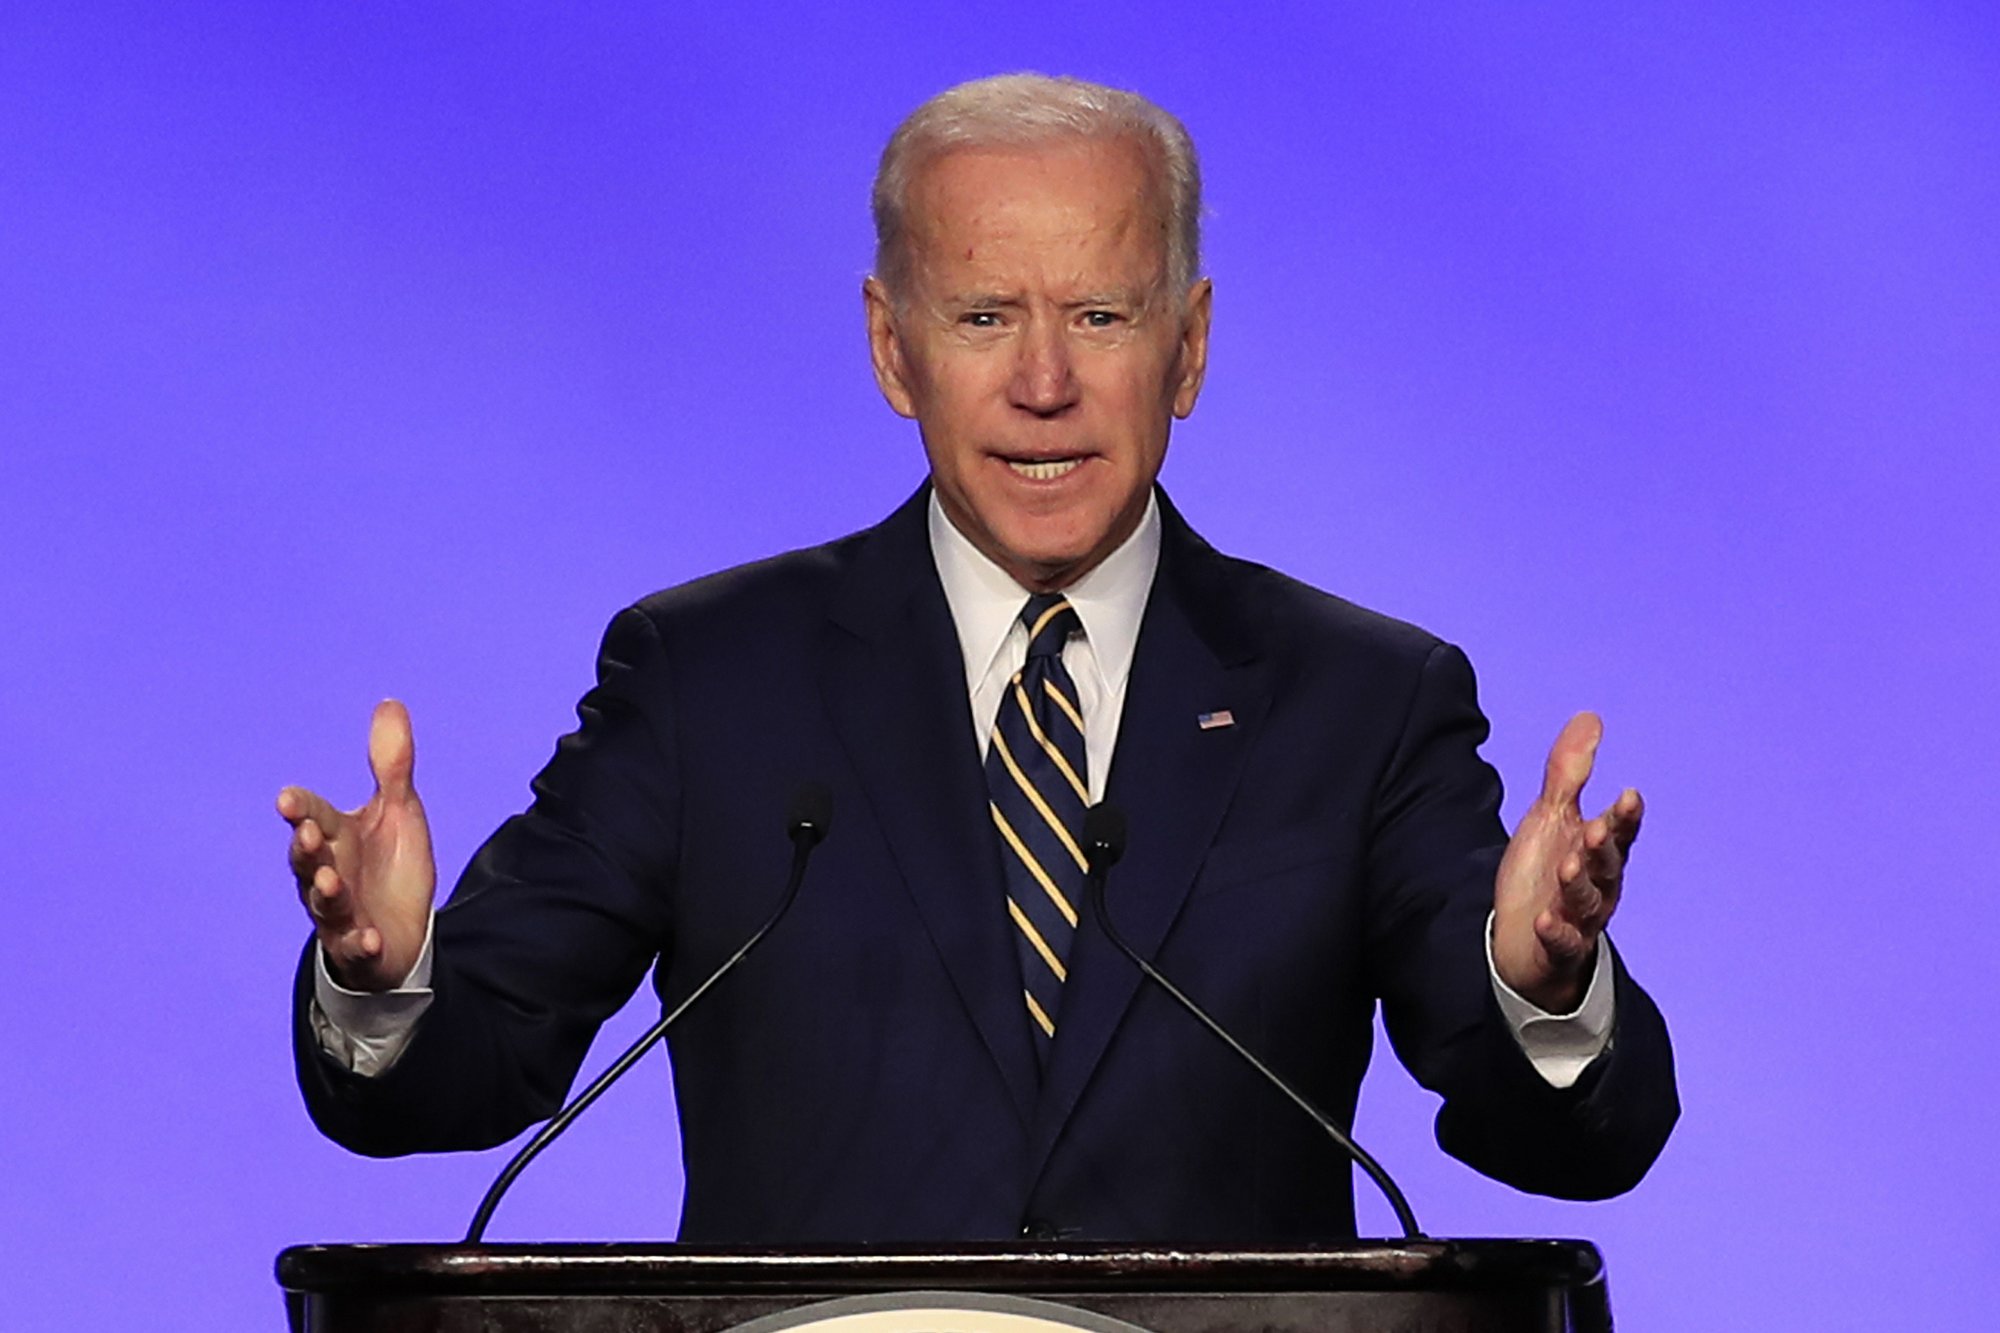 In this April 5, 2019 photo, former Vice President Joe Biden speaks at the International Brotherhood of Electrical Workers construction and maintenance conference in Washington. (AP Photo/Manuel Balce Ceneta)